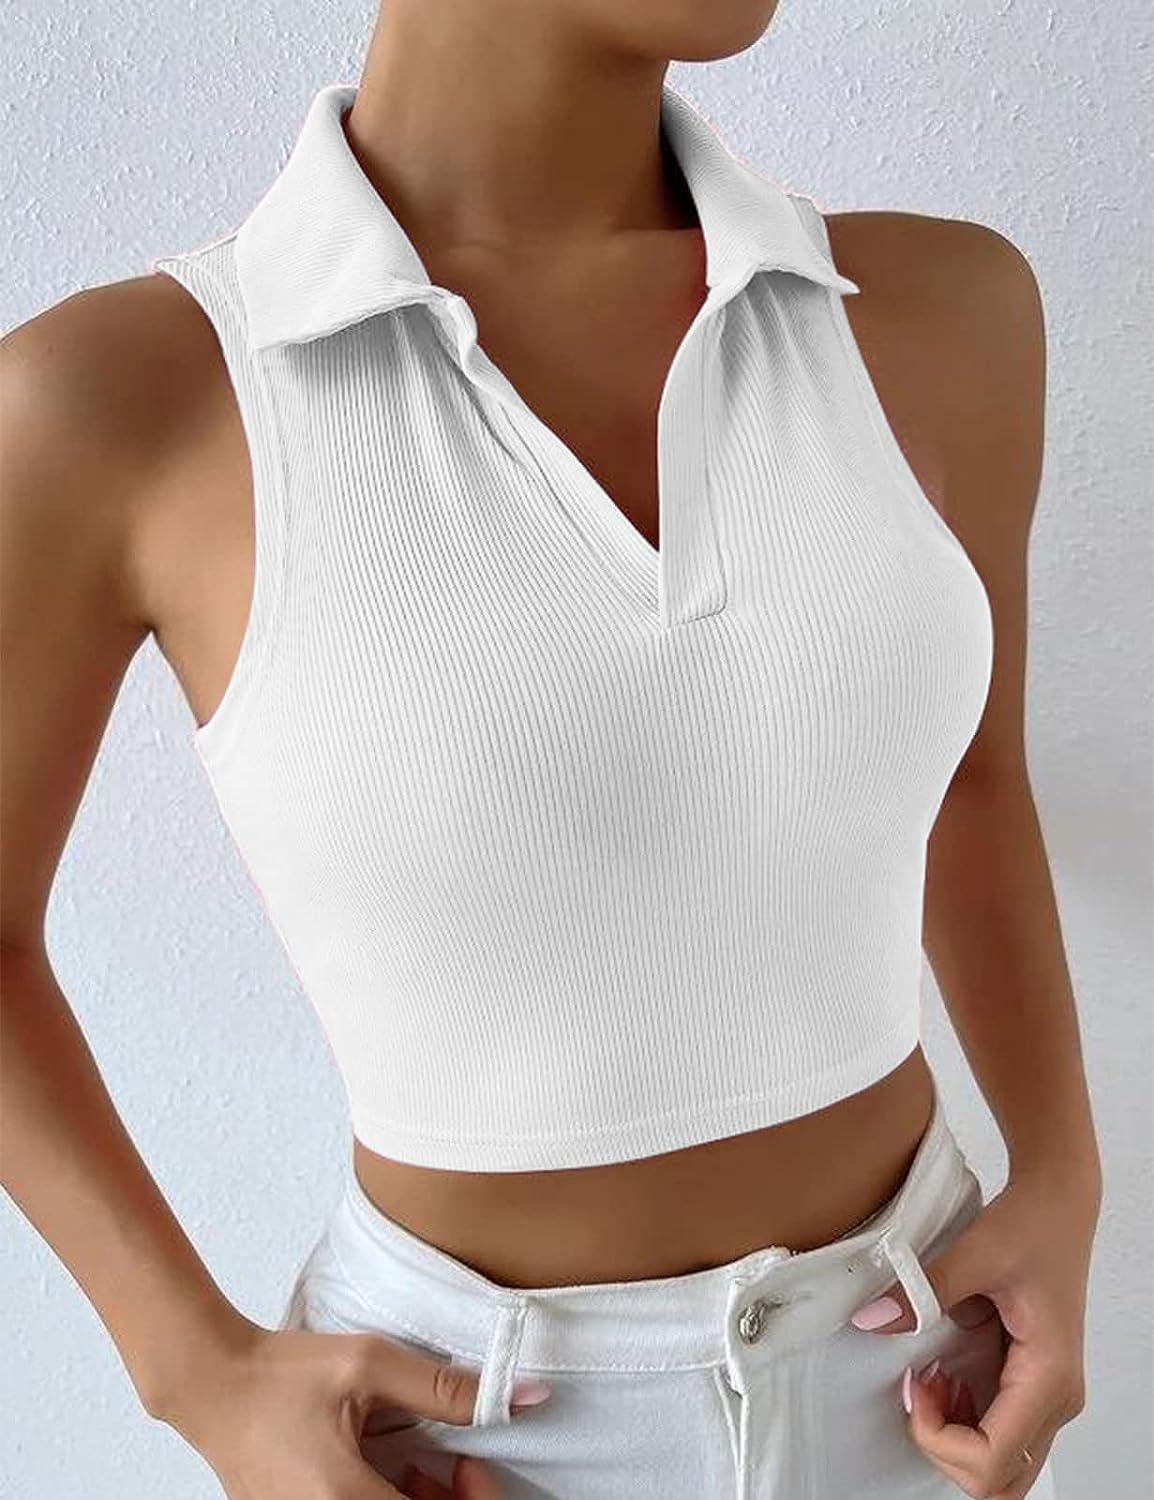 Hot Womens Camisole Tops with Built in Bra Girls Vest Padded Slim Fit Tops